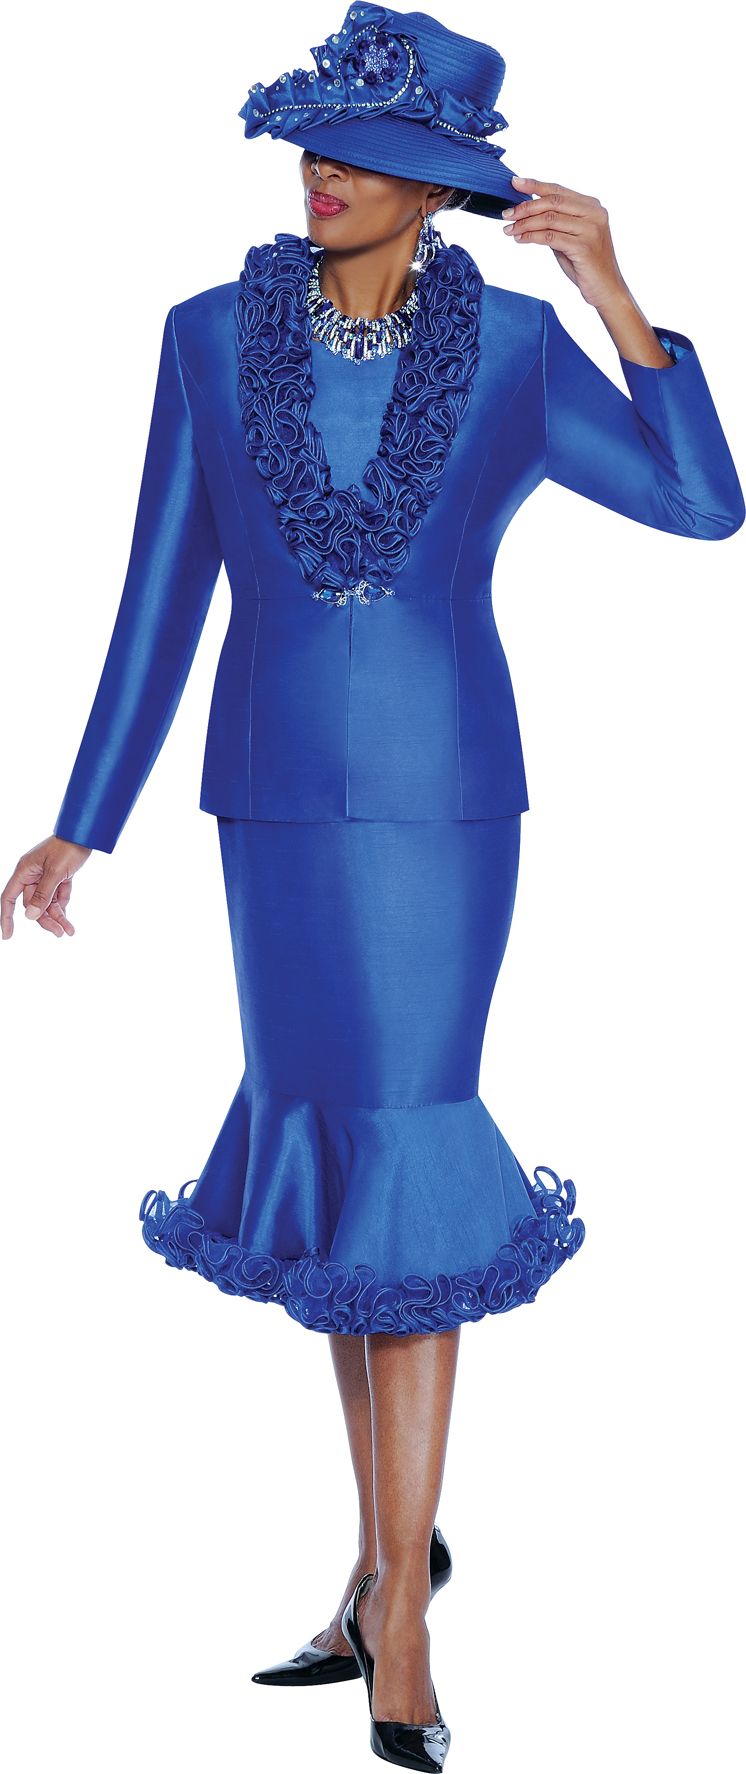 Terramina 7458 Womens Church Suit with Ruffles: French Novelty